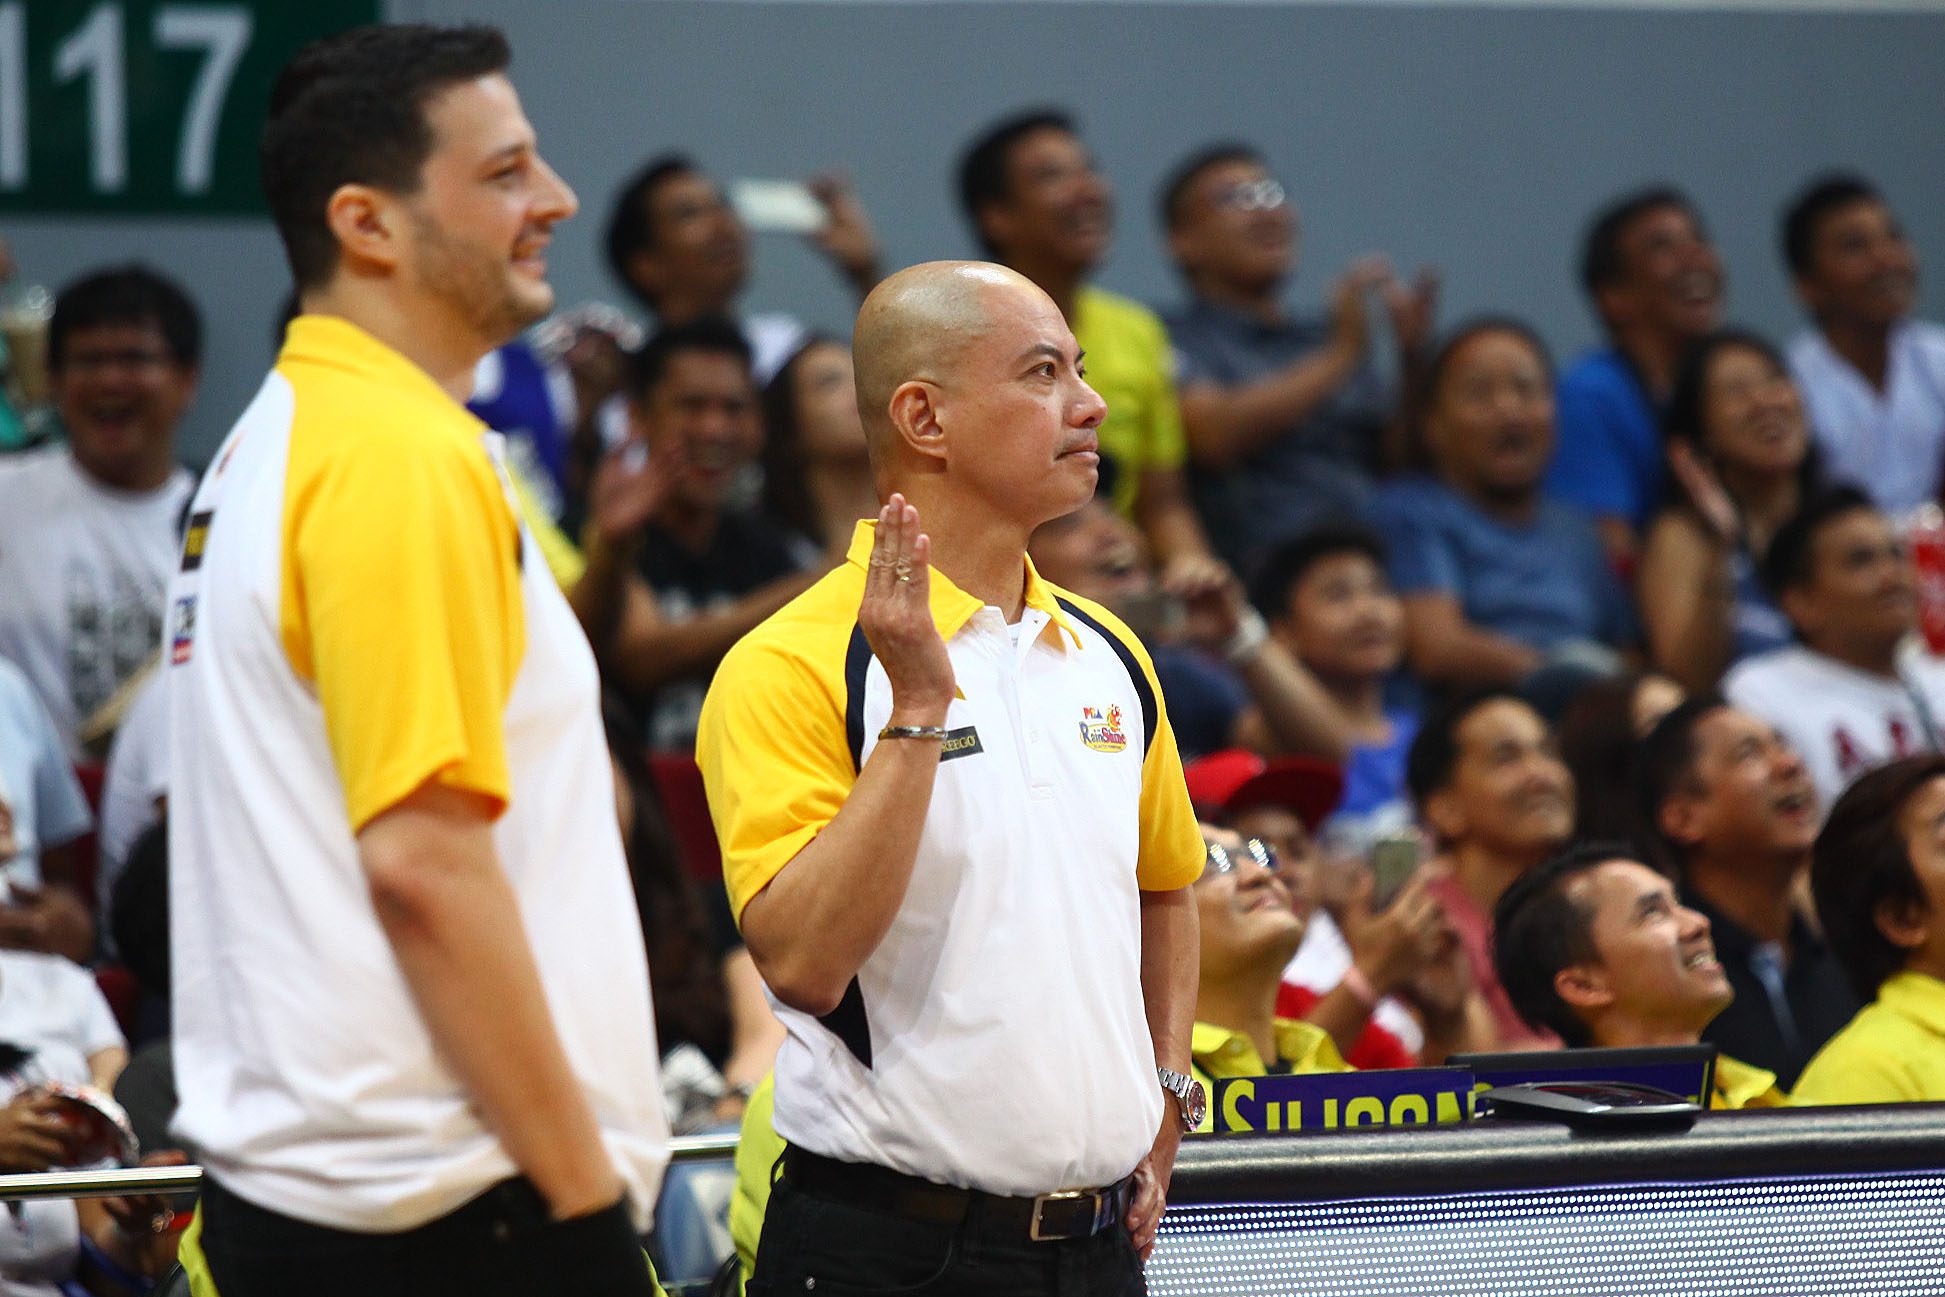 PABEBE WAVE. Rain or Shine coach Yeng Guiao sparks laughter as he did the popular "pabebe wave" after the scuffle with Chris Ross. The hand gesture was made popular by the "AlDub" love team. Photo by Josh Albelda/Rappler 